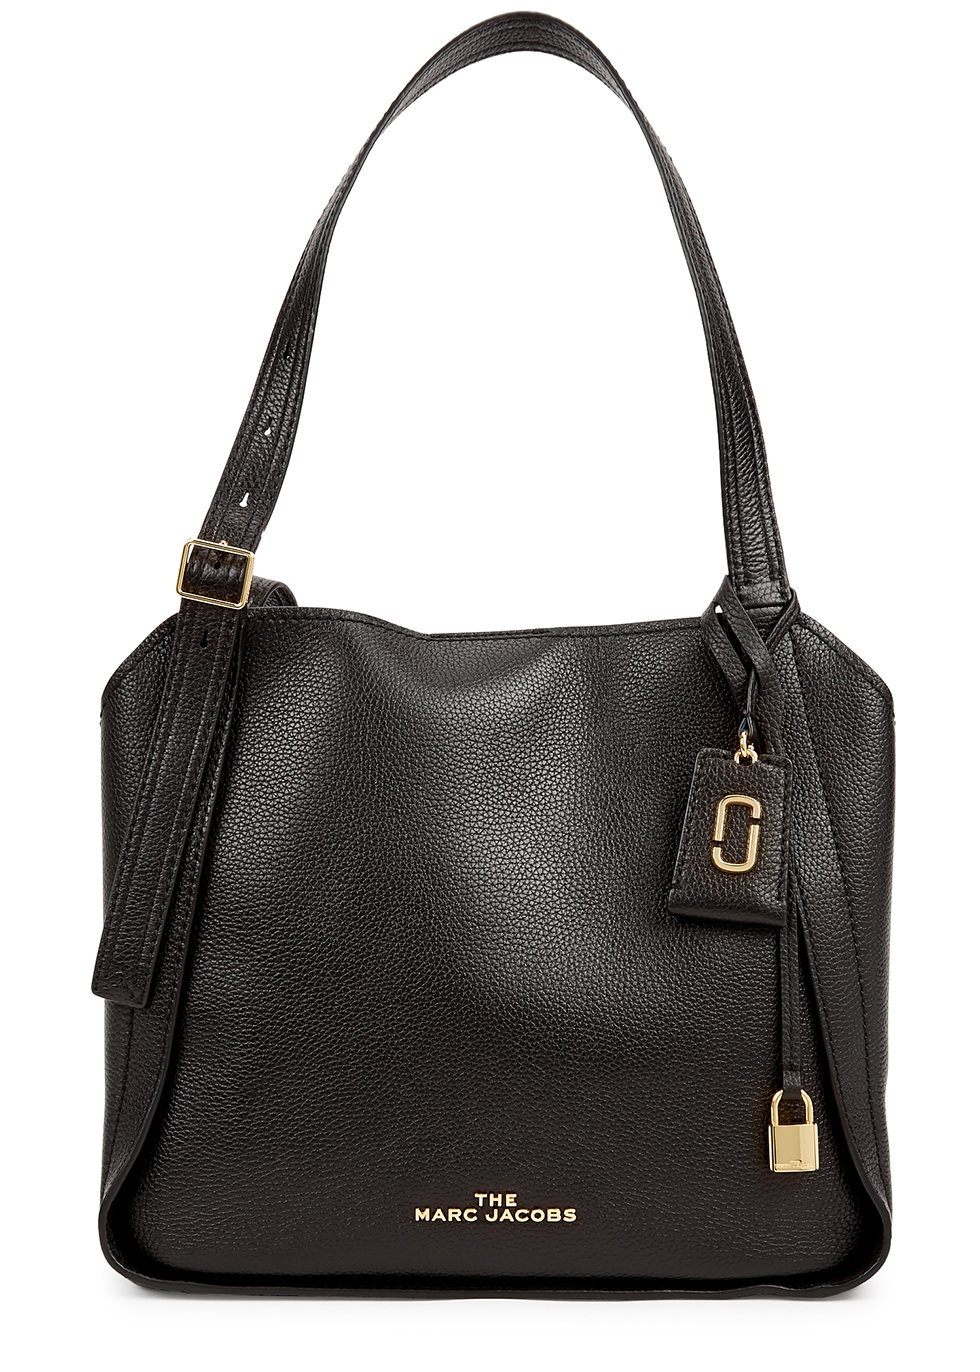 Marc Jacobs (The) The Director black leather tote - Harvey Nichols